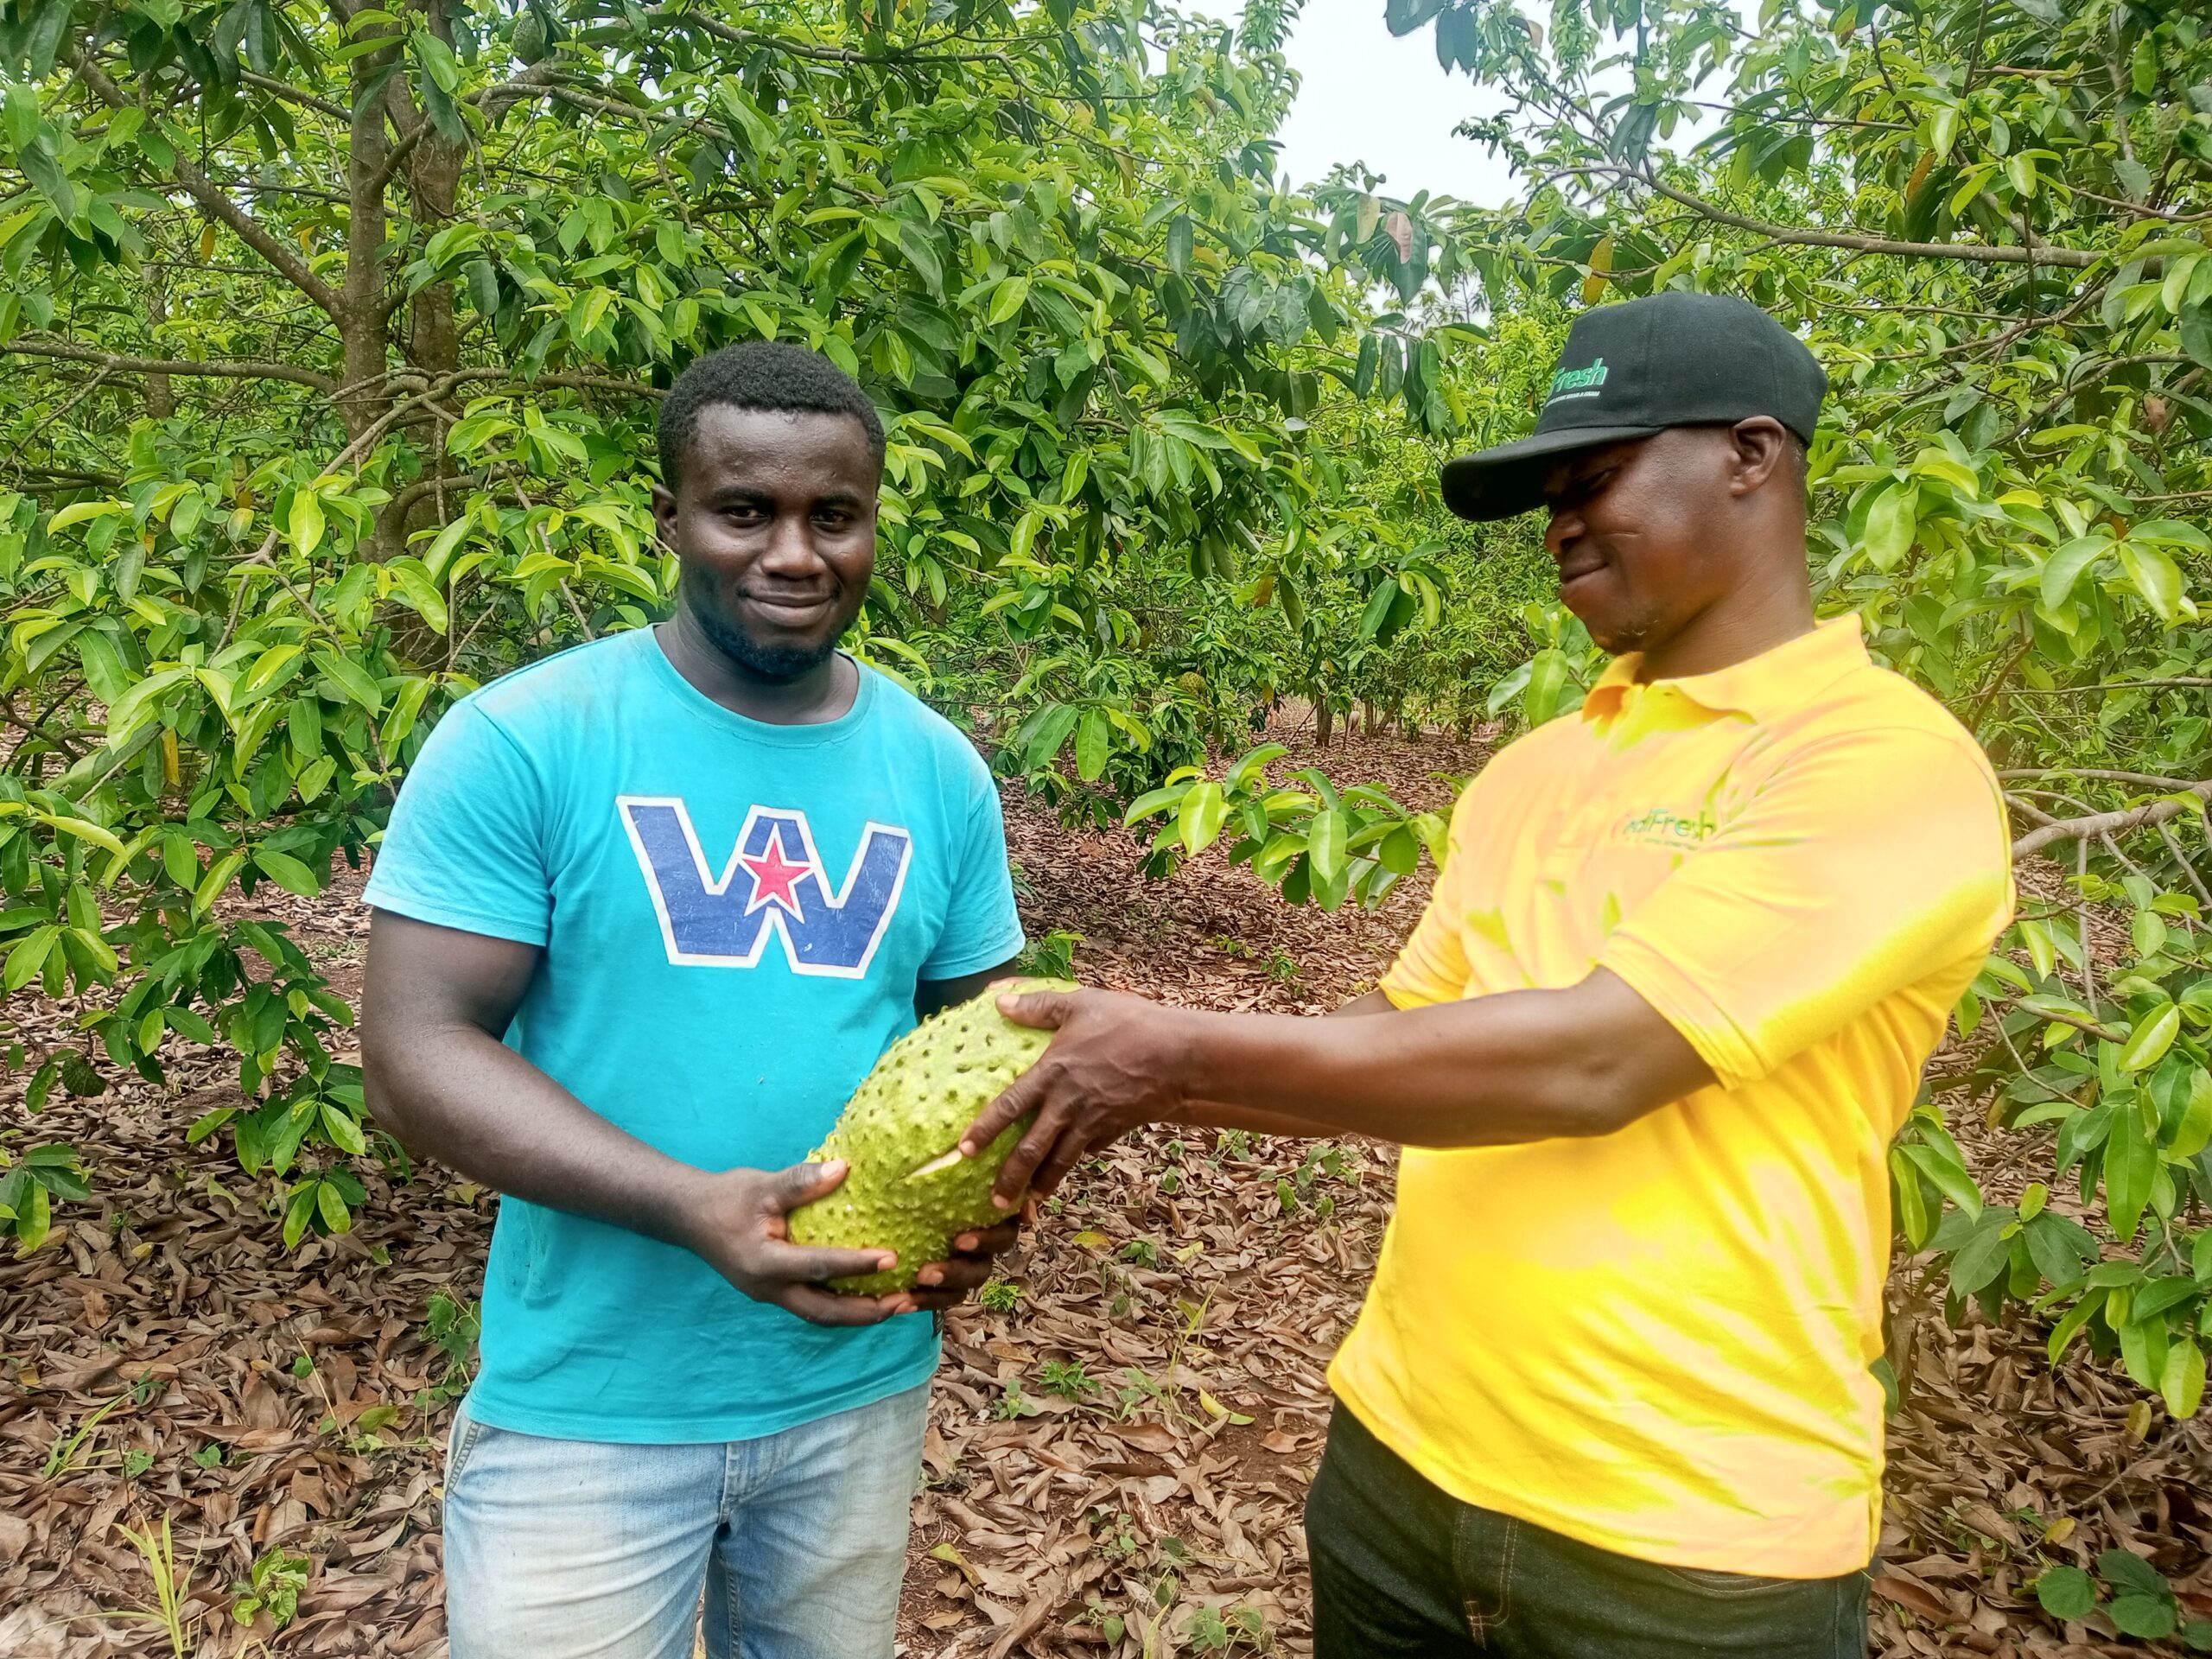 Mr.Paul Ofosu, Operations Manager in the yellow Top